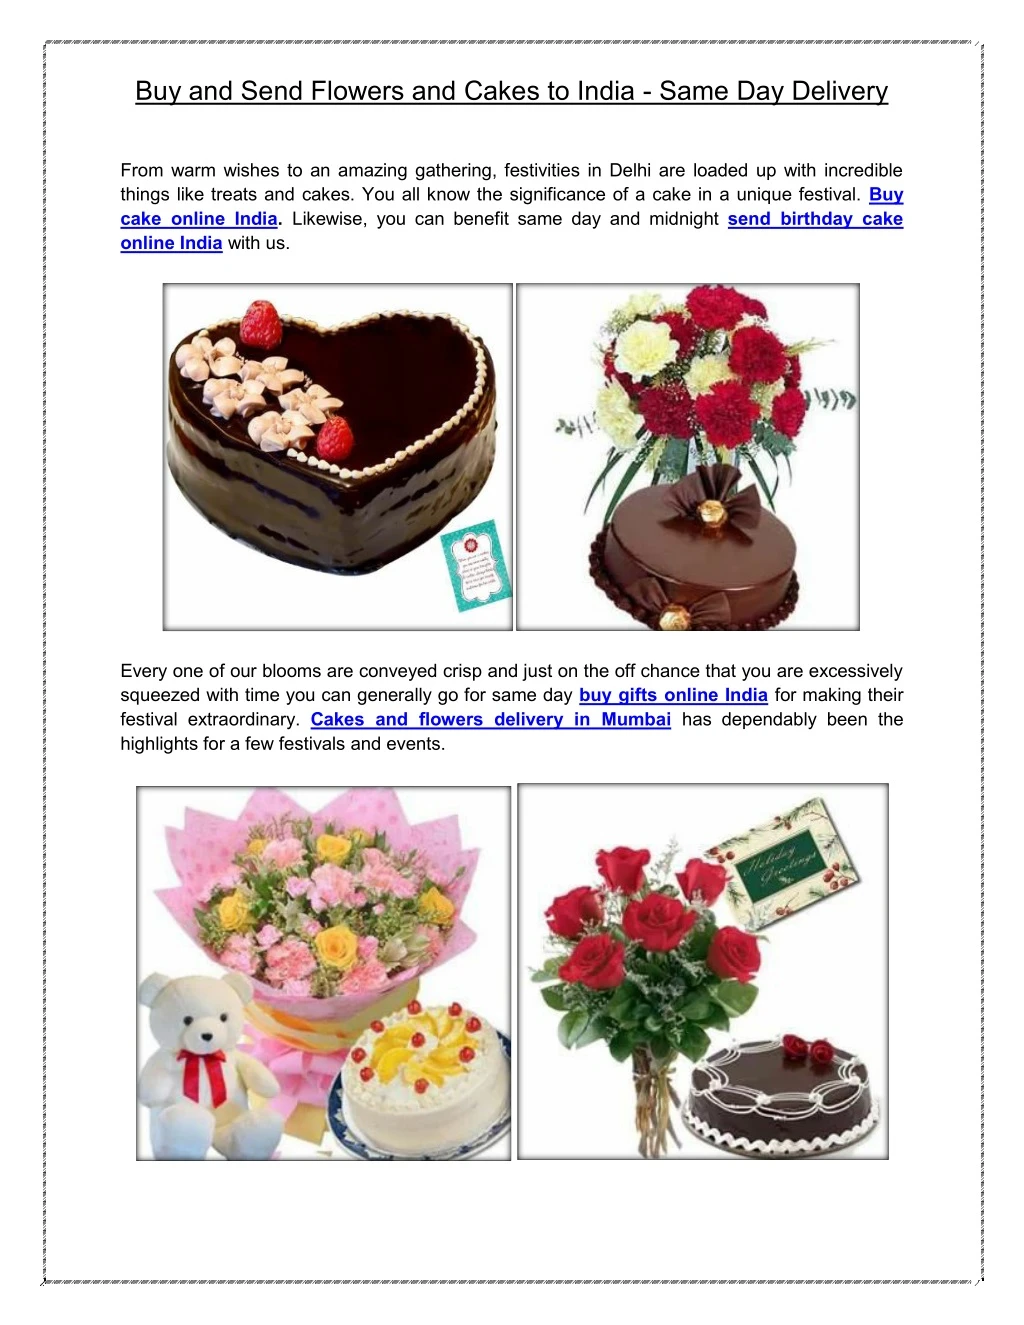 buy and send flowers and cakes to india same